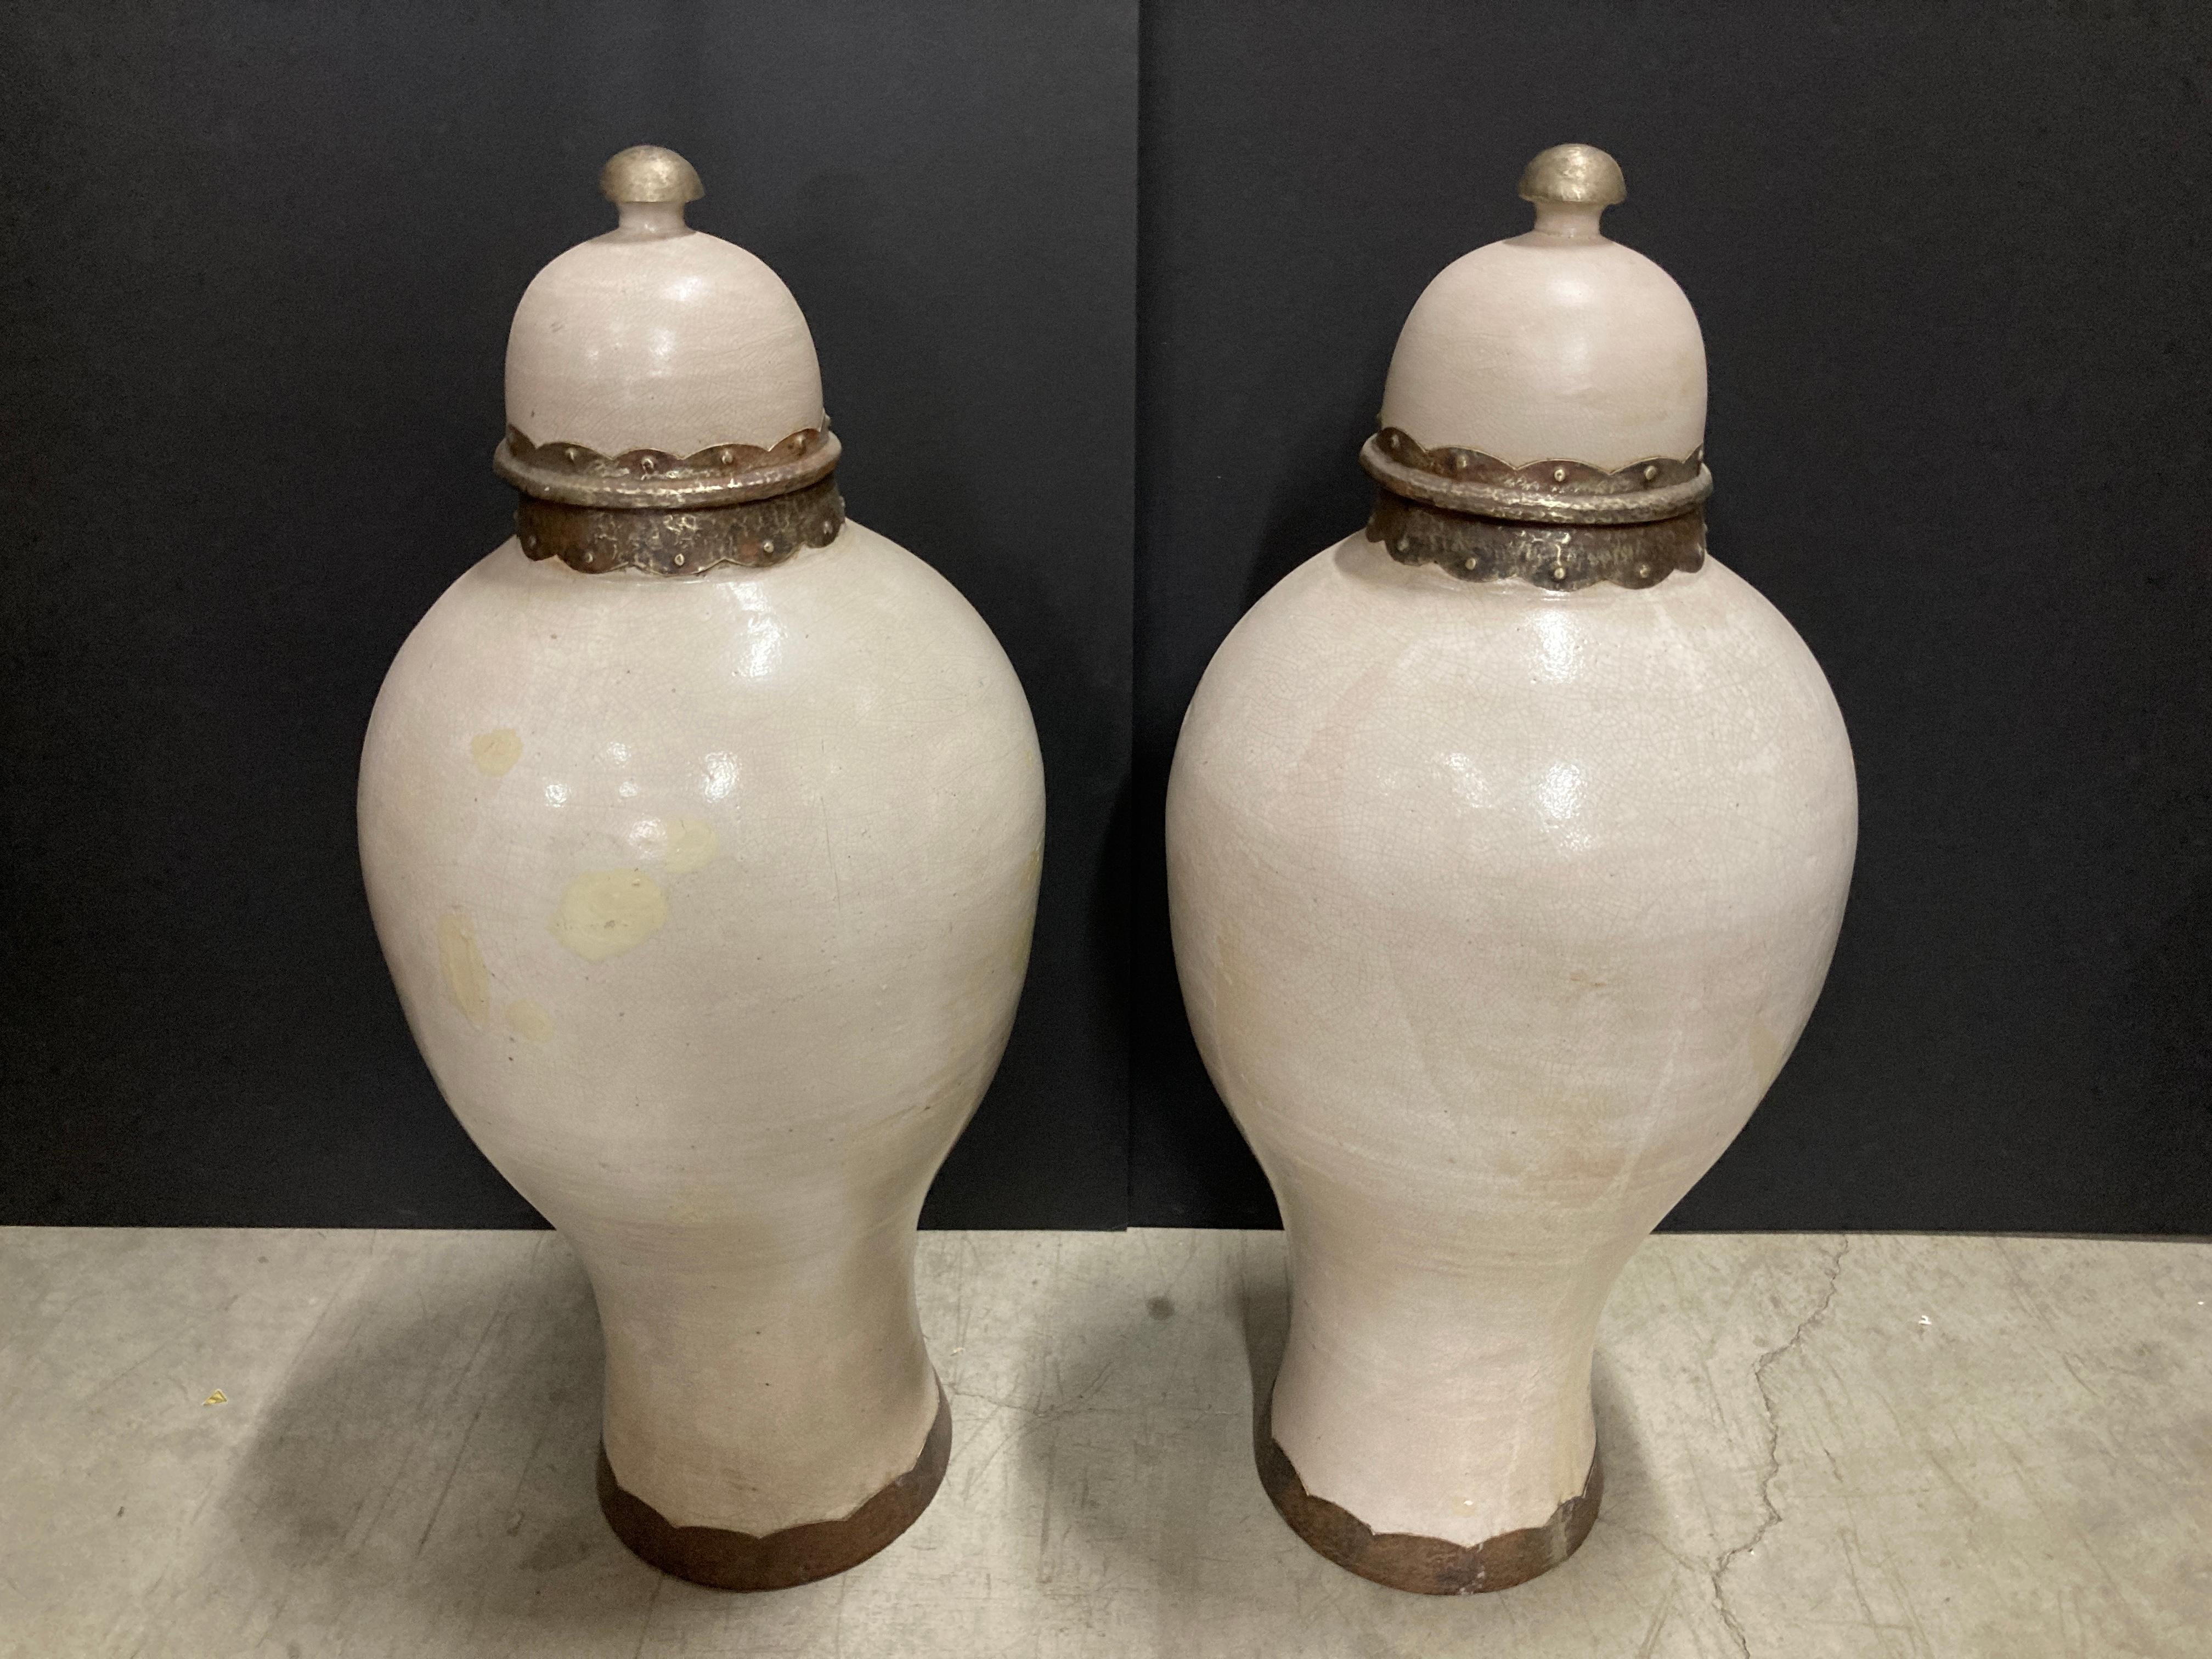 Pair of Moroccan Moorish Olive Jars with Lid from Fez, Ivory Color 12